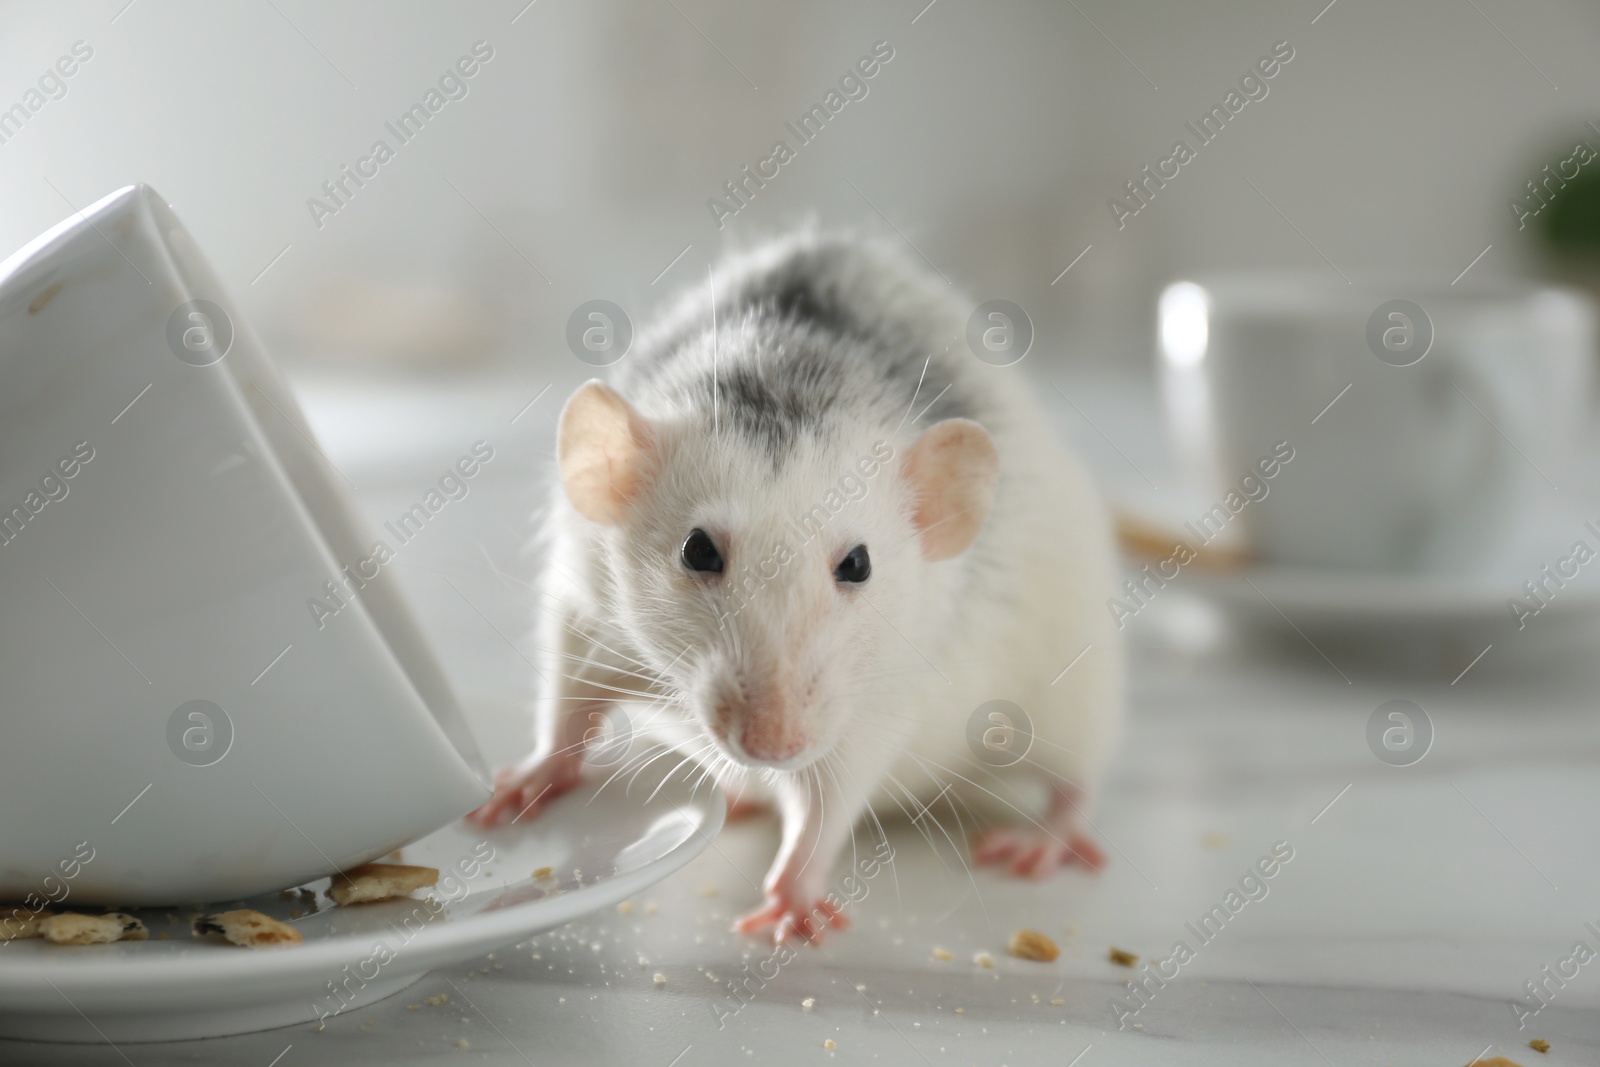 Photo of Rat near dirty dishes on table indoors, closeup. Pest control